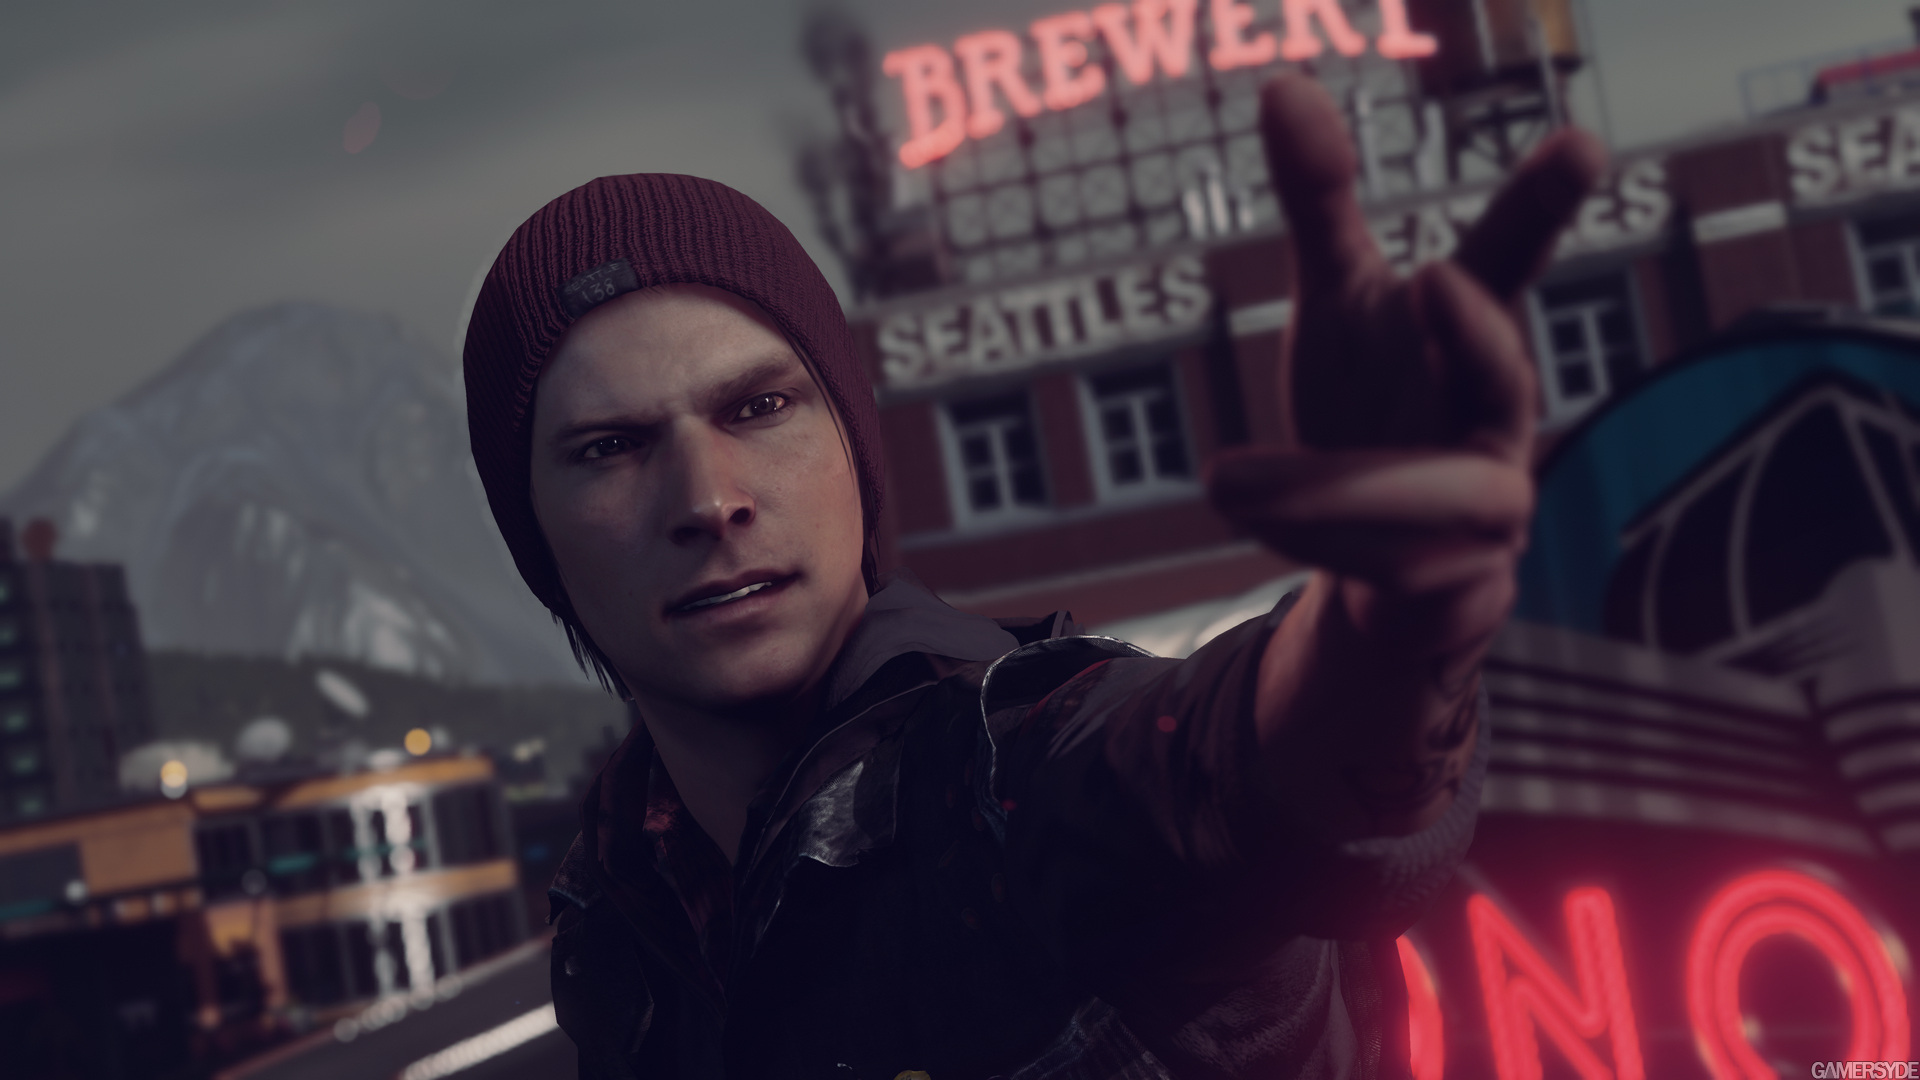 image_infamous_second_son-22142-2661_0004.jpg